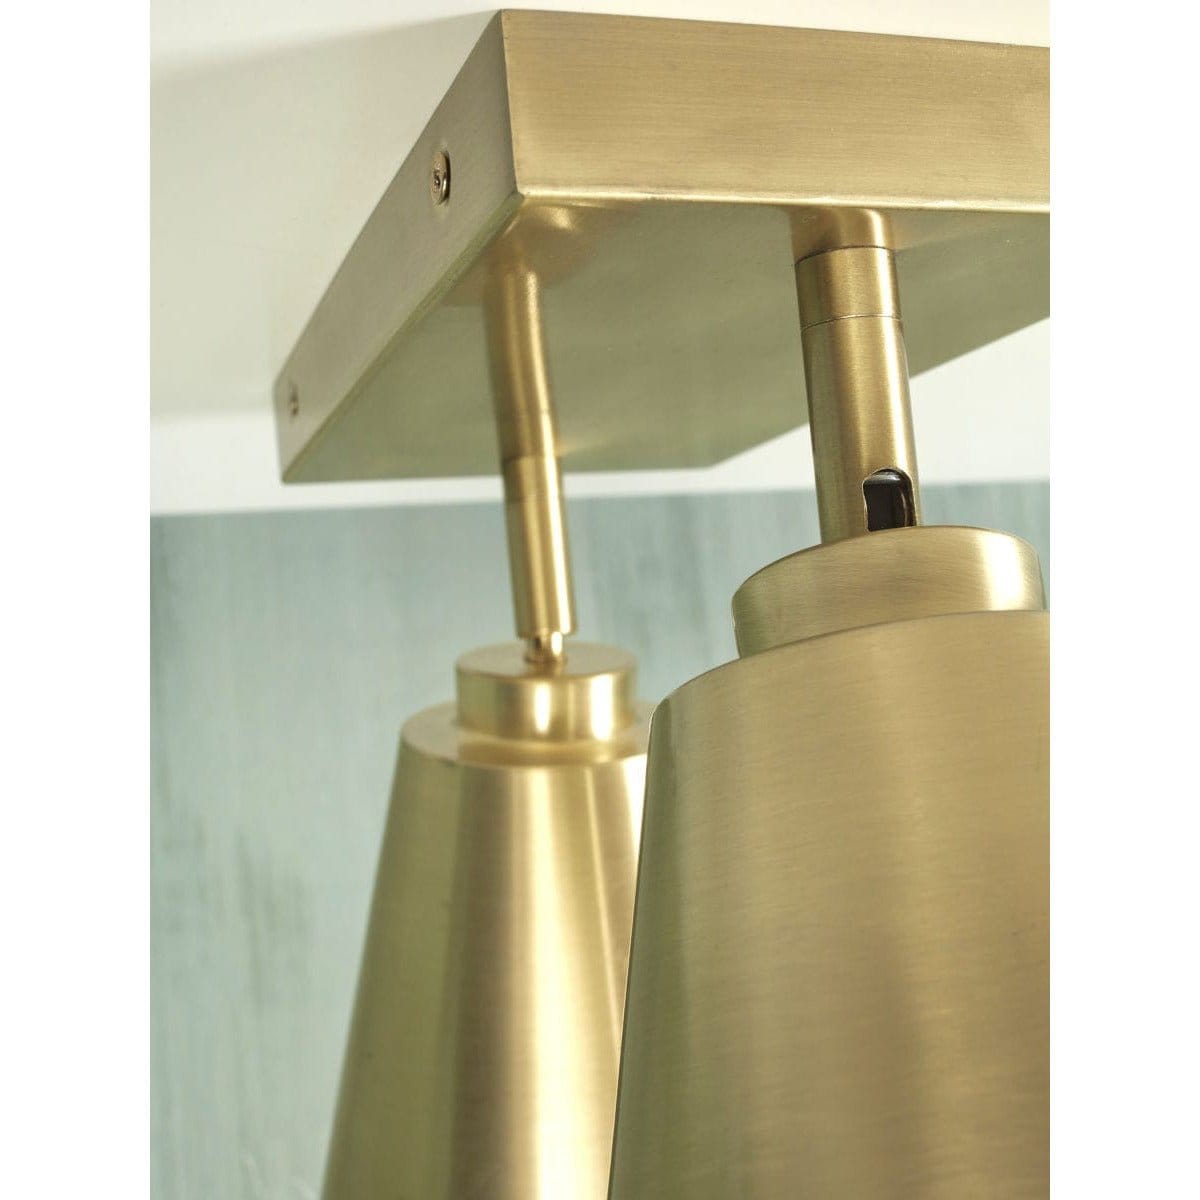 It's About RoMi Ceiling light Bremen Ceiling Light 2 Shades, black or gold